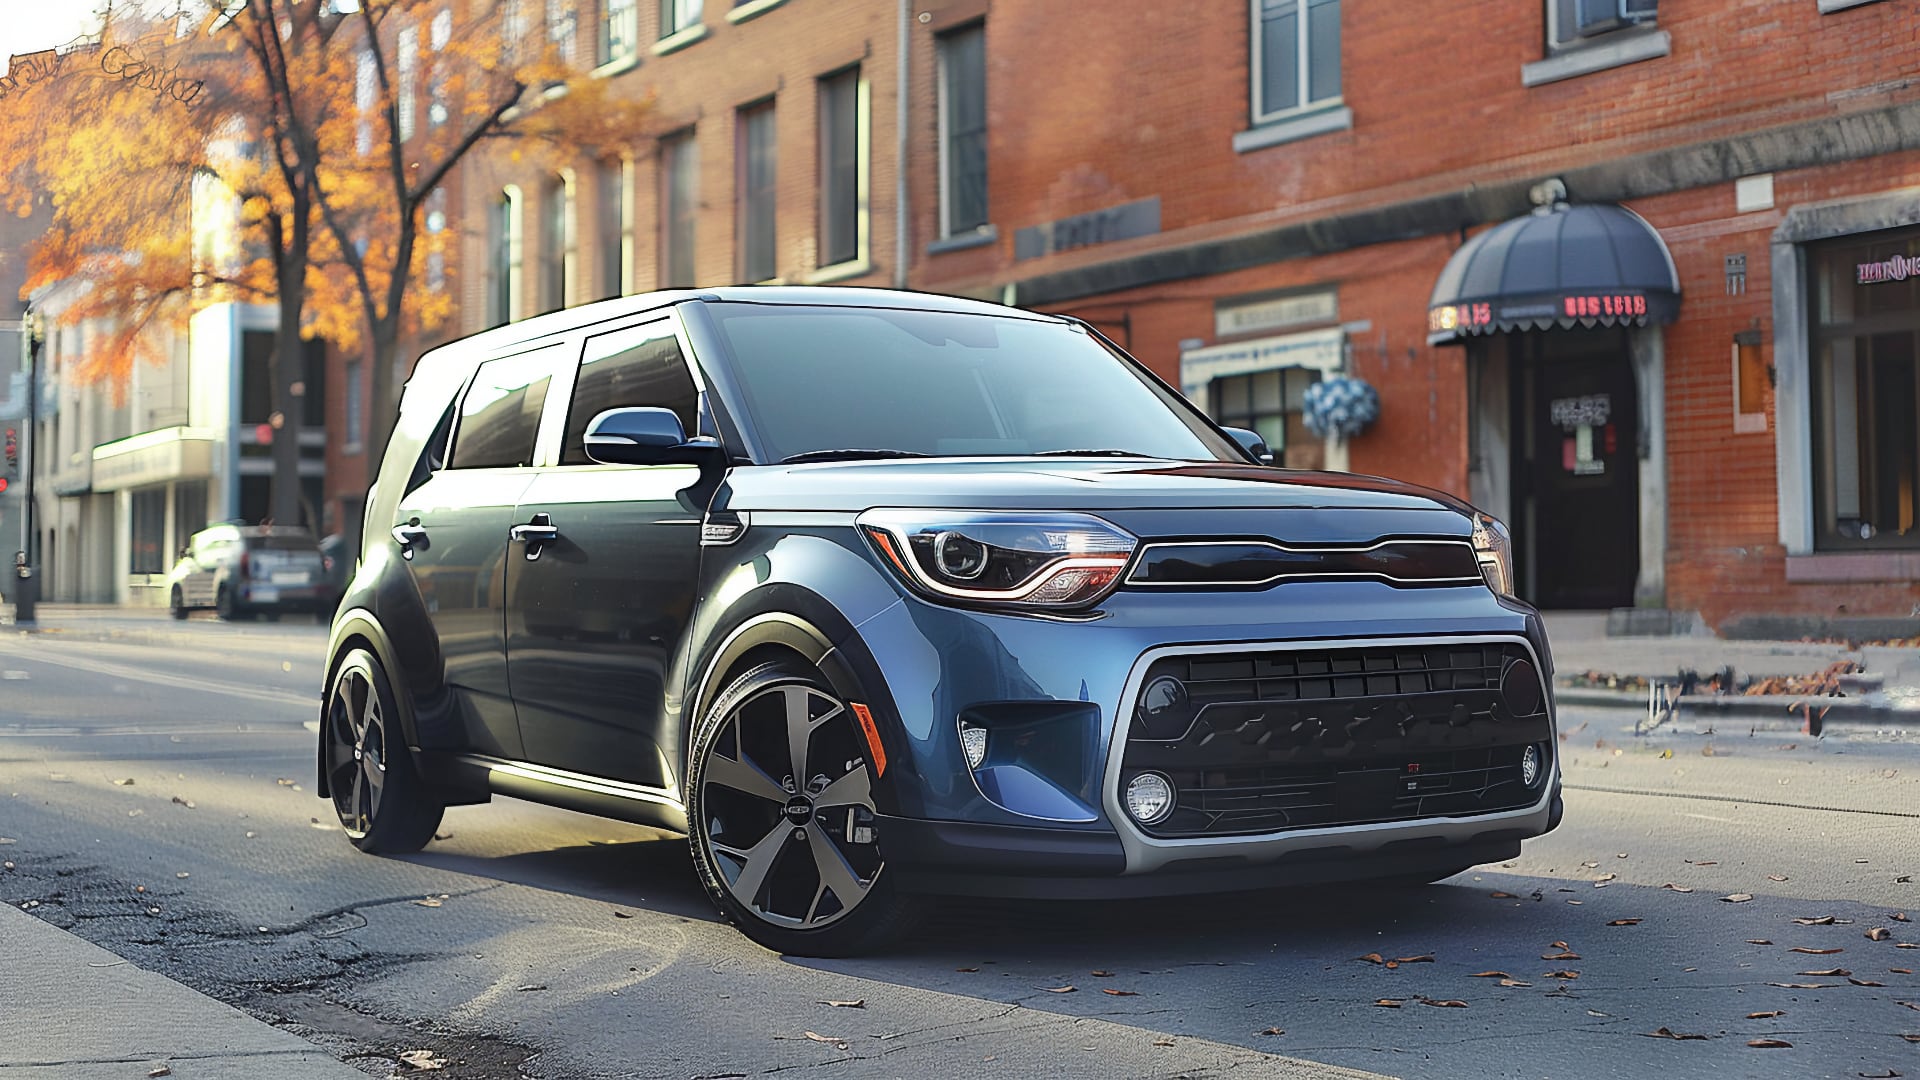 The 2020 Kia Soul is parked on a city street, offering a trendy and stylish choice for urban driving.